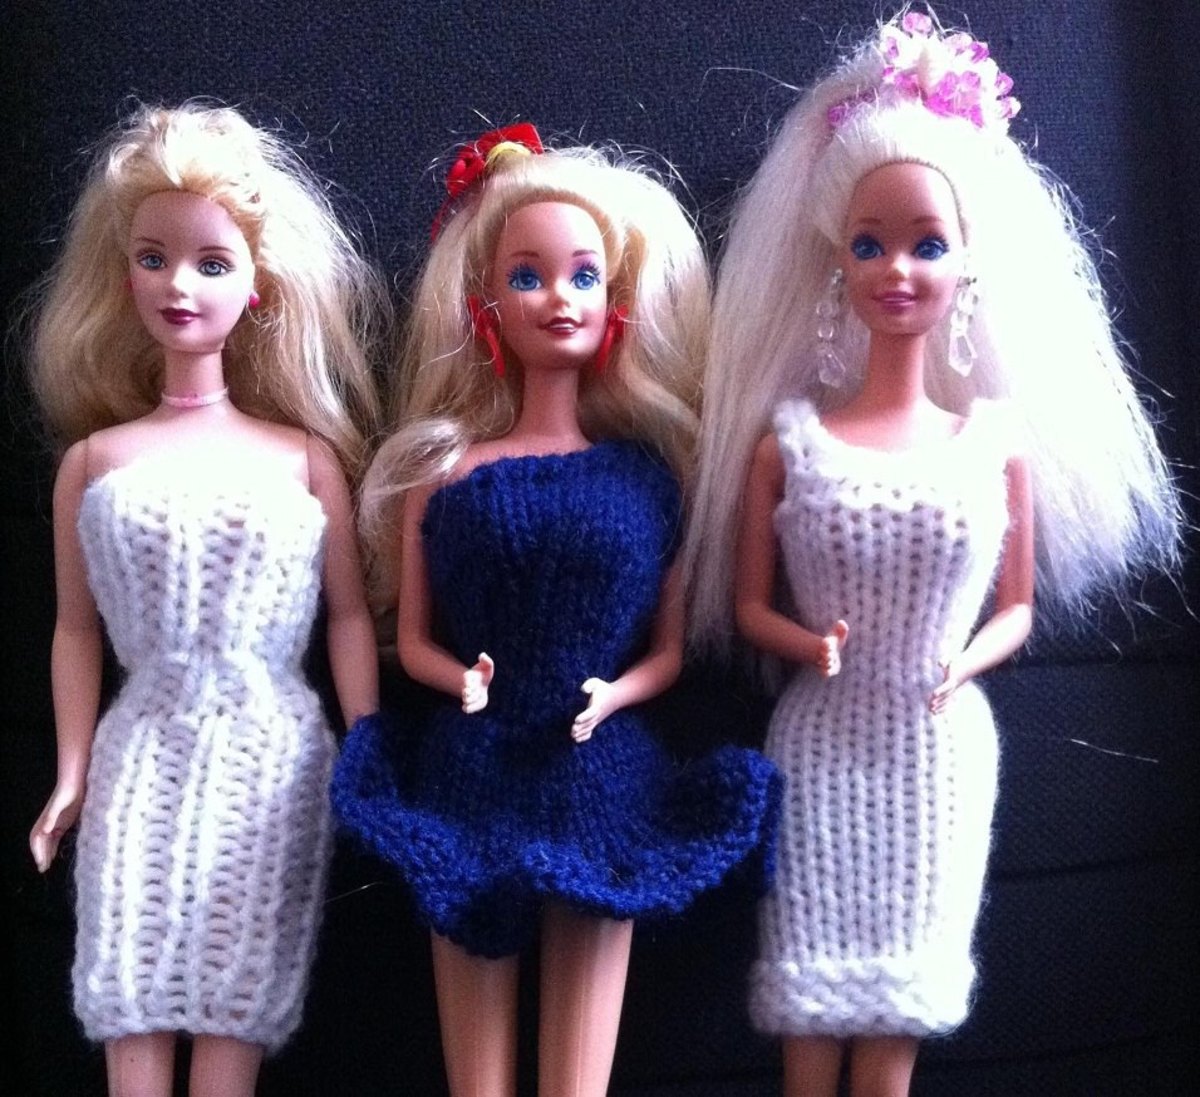 Help Underprivileged Children by Donating Barbies (and Other Toys)